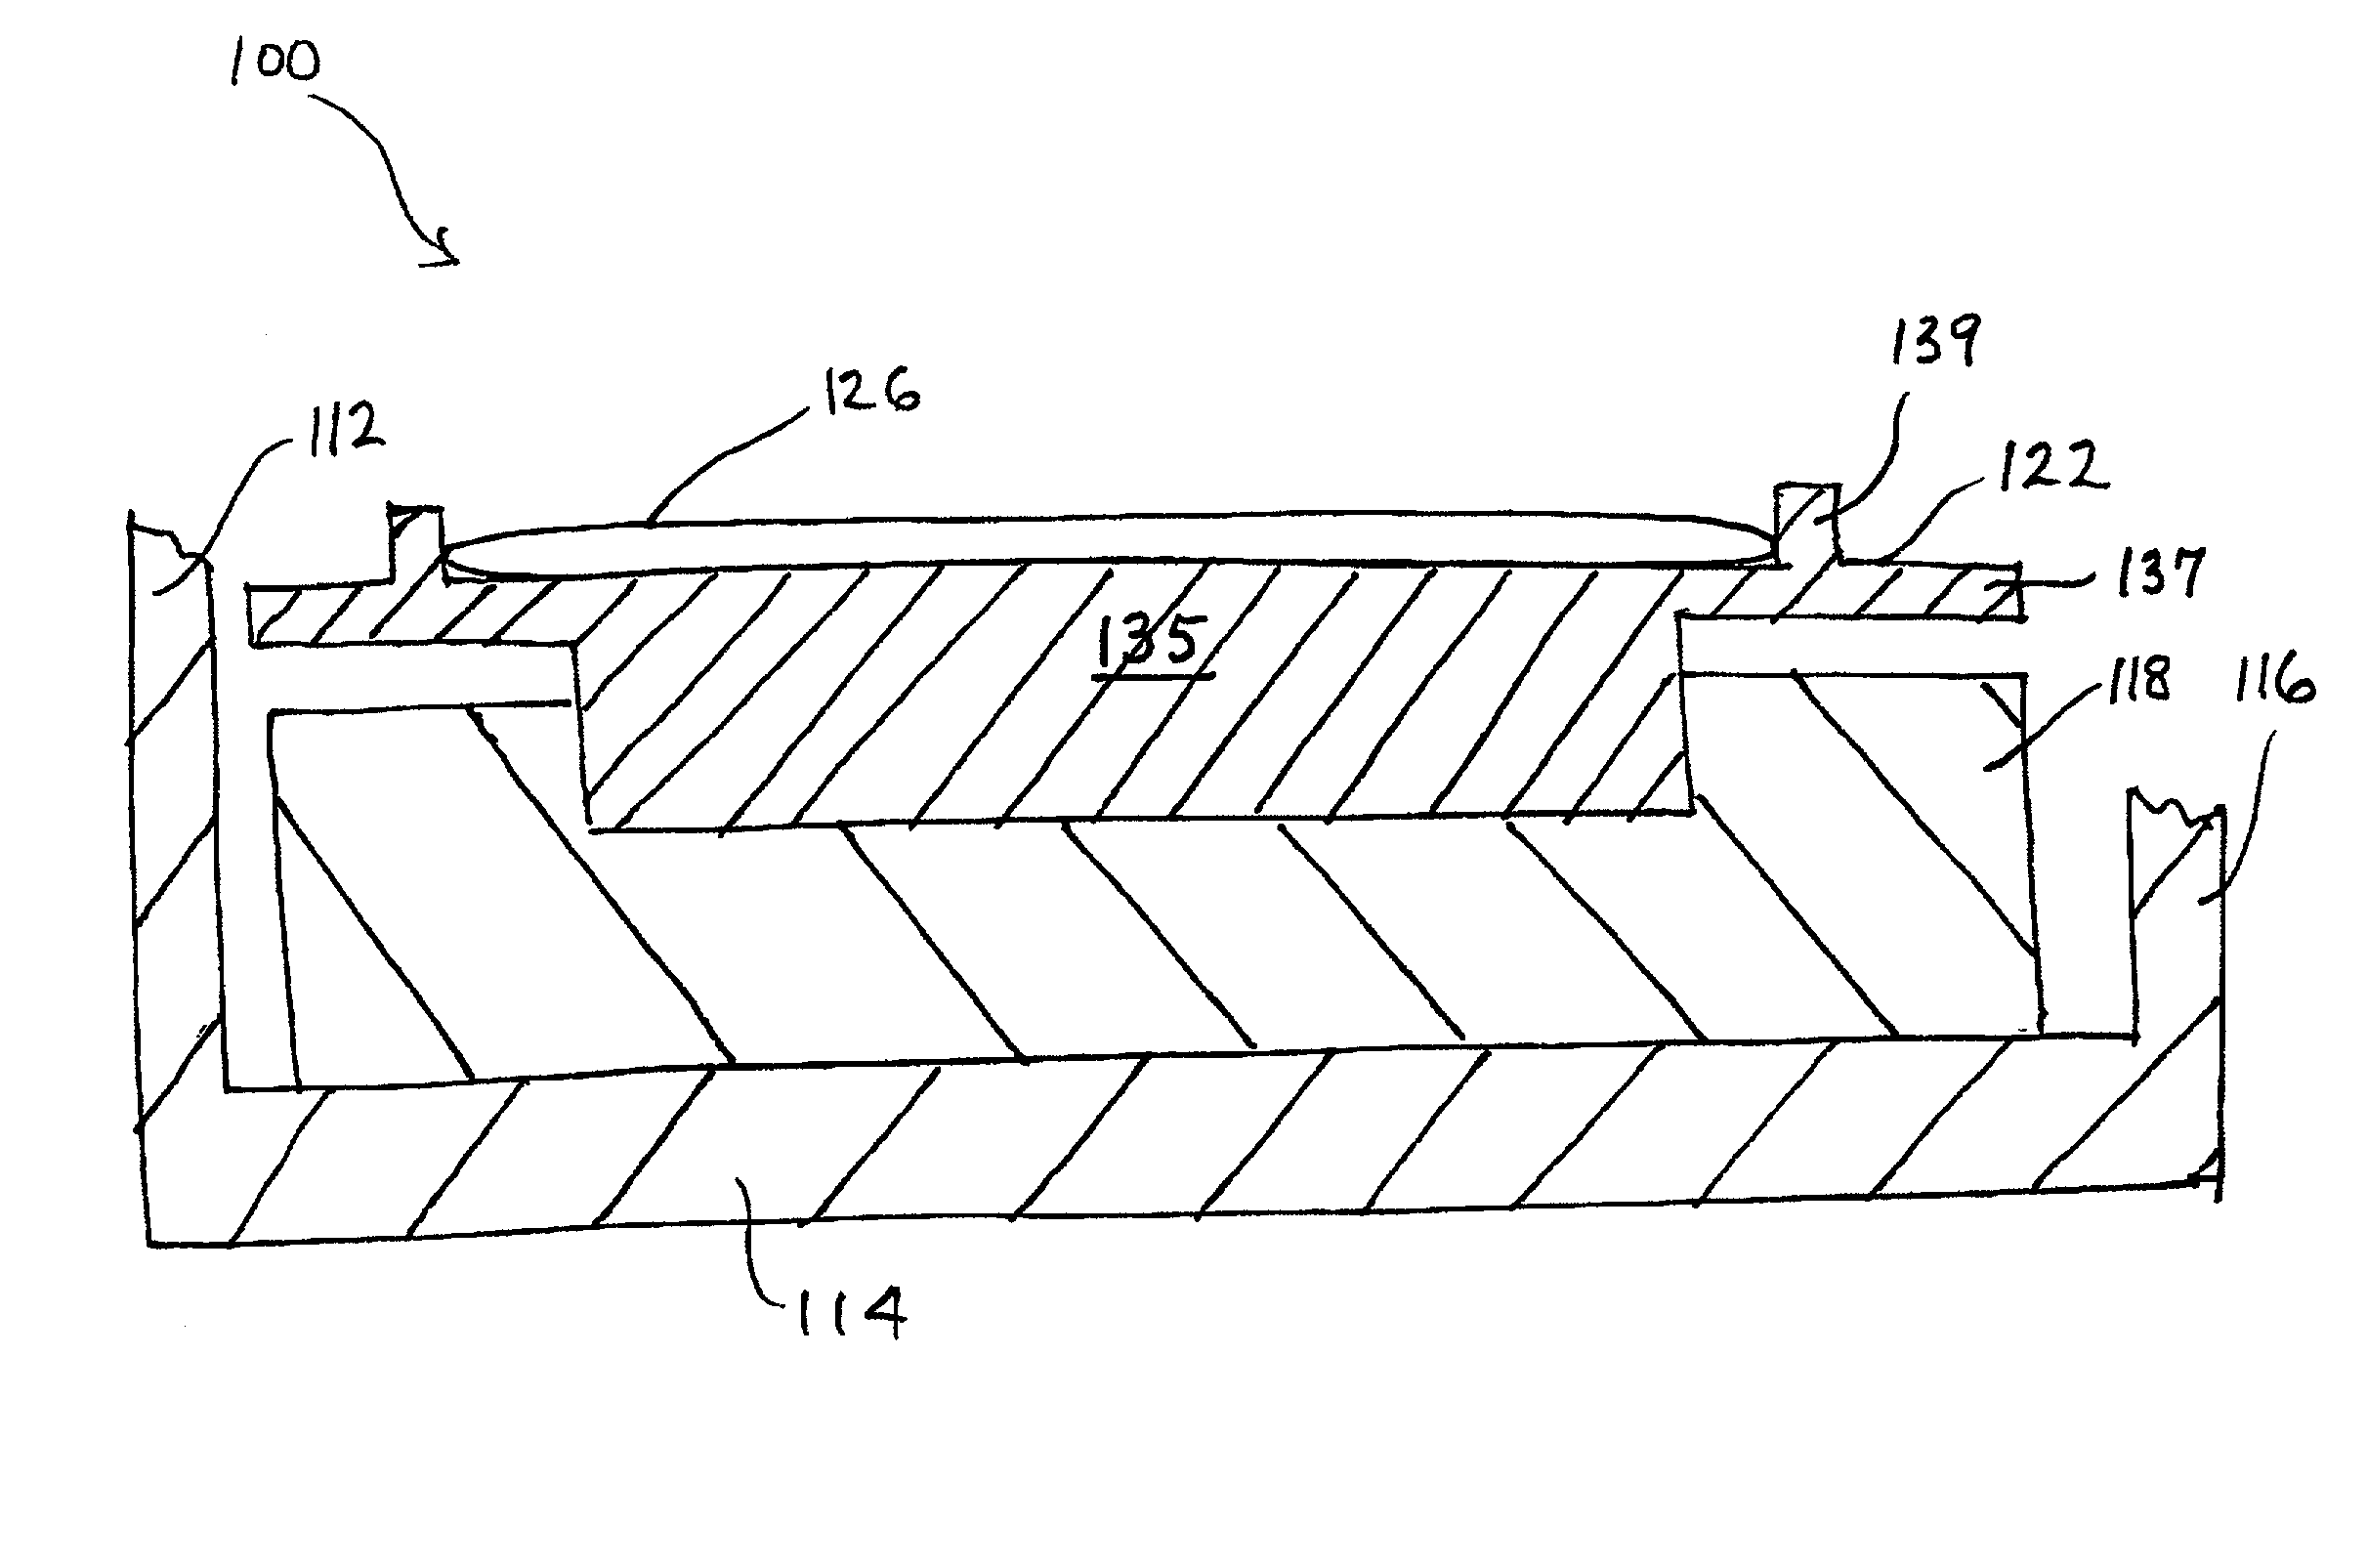 Wafer carrier for semiconductor process tool